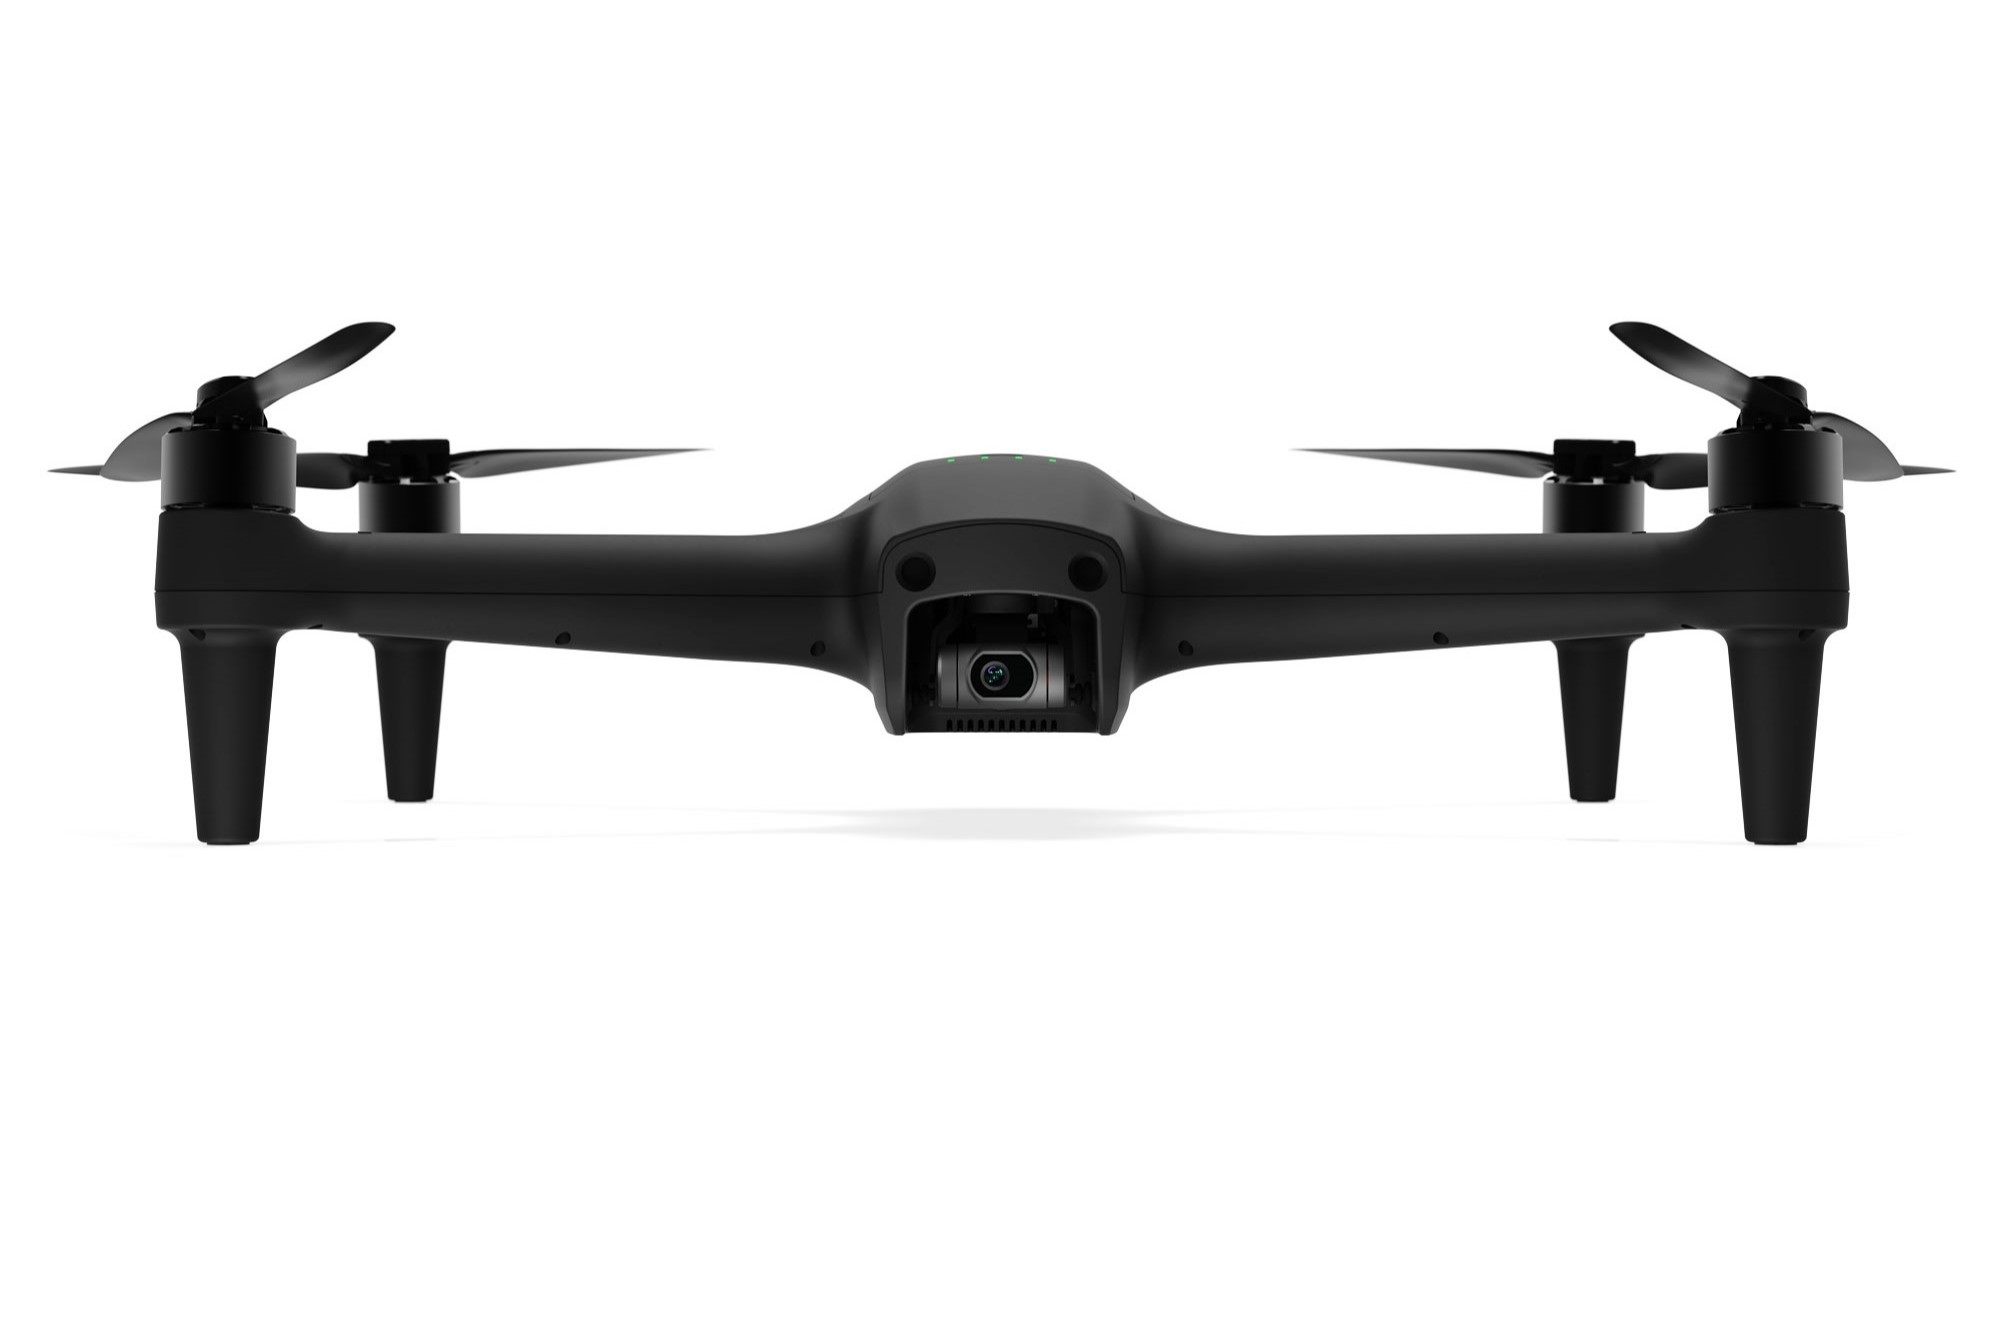 Aeroo Pro drone as seen from the front.